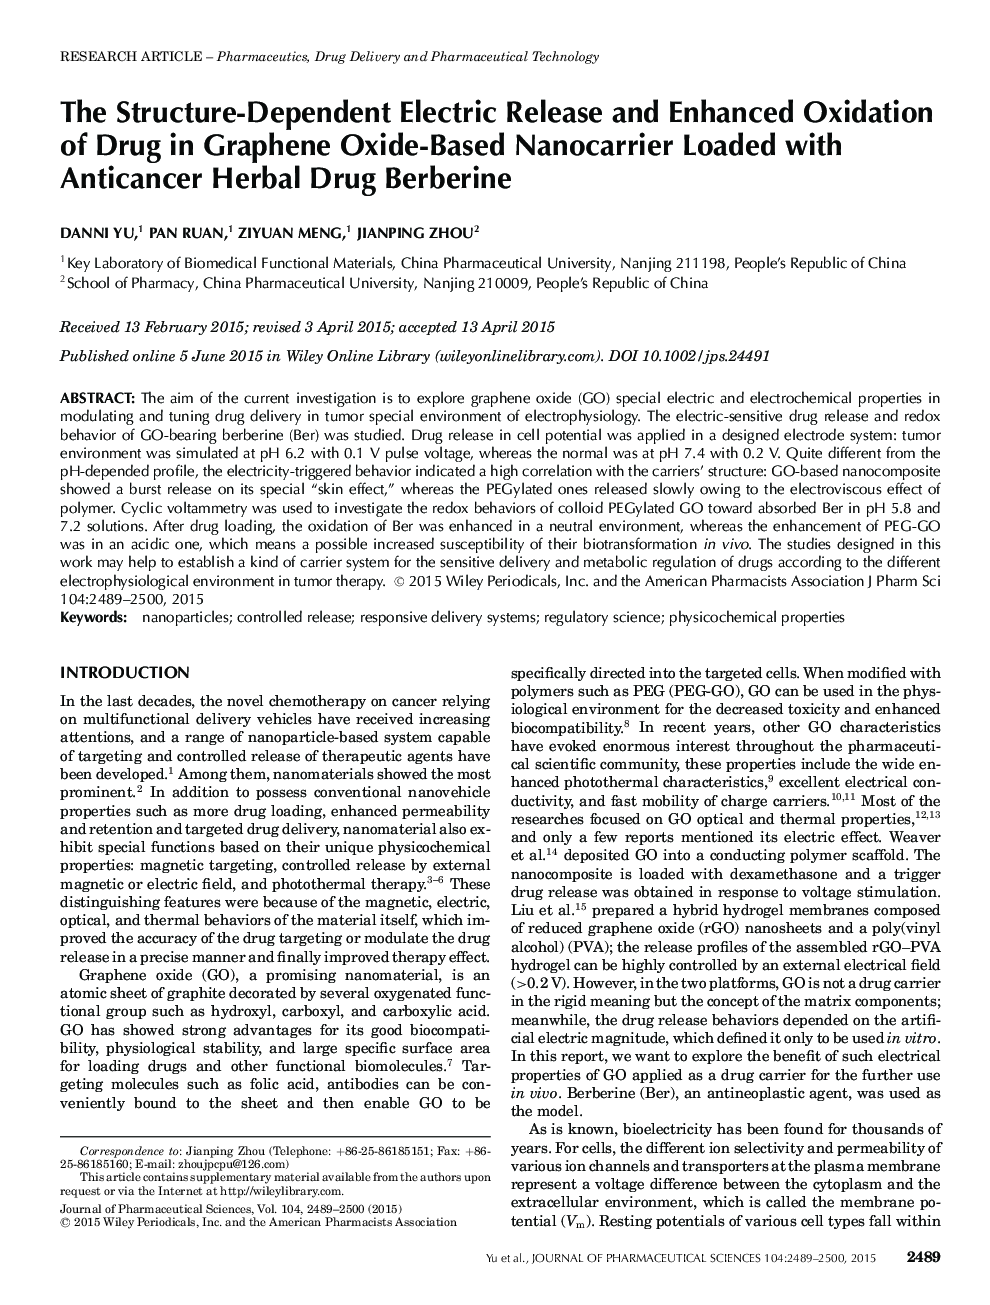 The Structure-Dependent Electric Release and Enhanced Oxidation of Drug in Graphene Oxide-Based Nanocarrier Loaded with Anticancer Herbal Drug Berberine